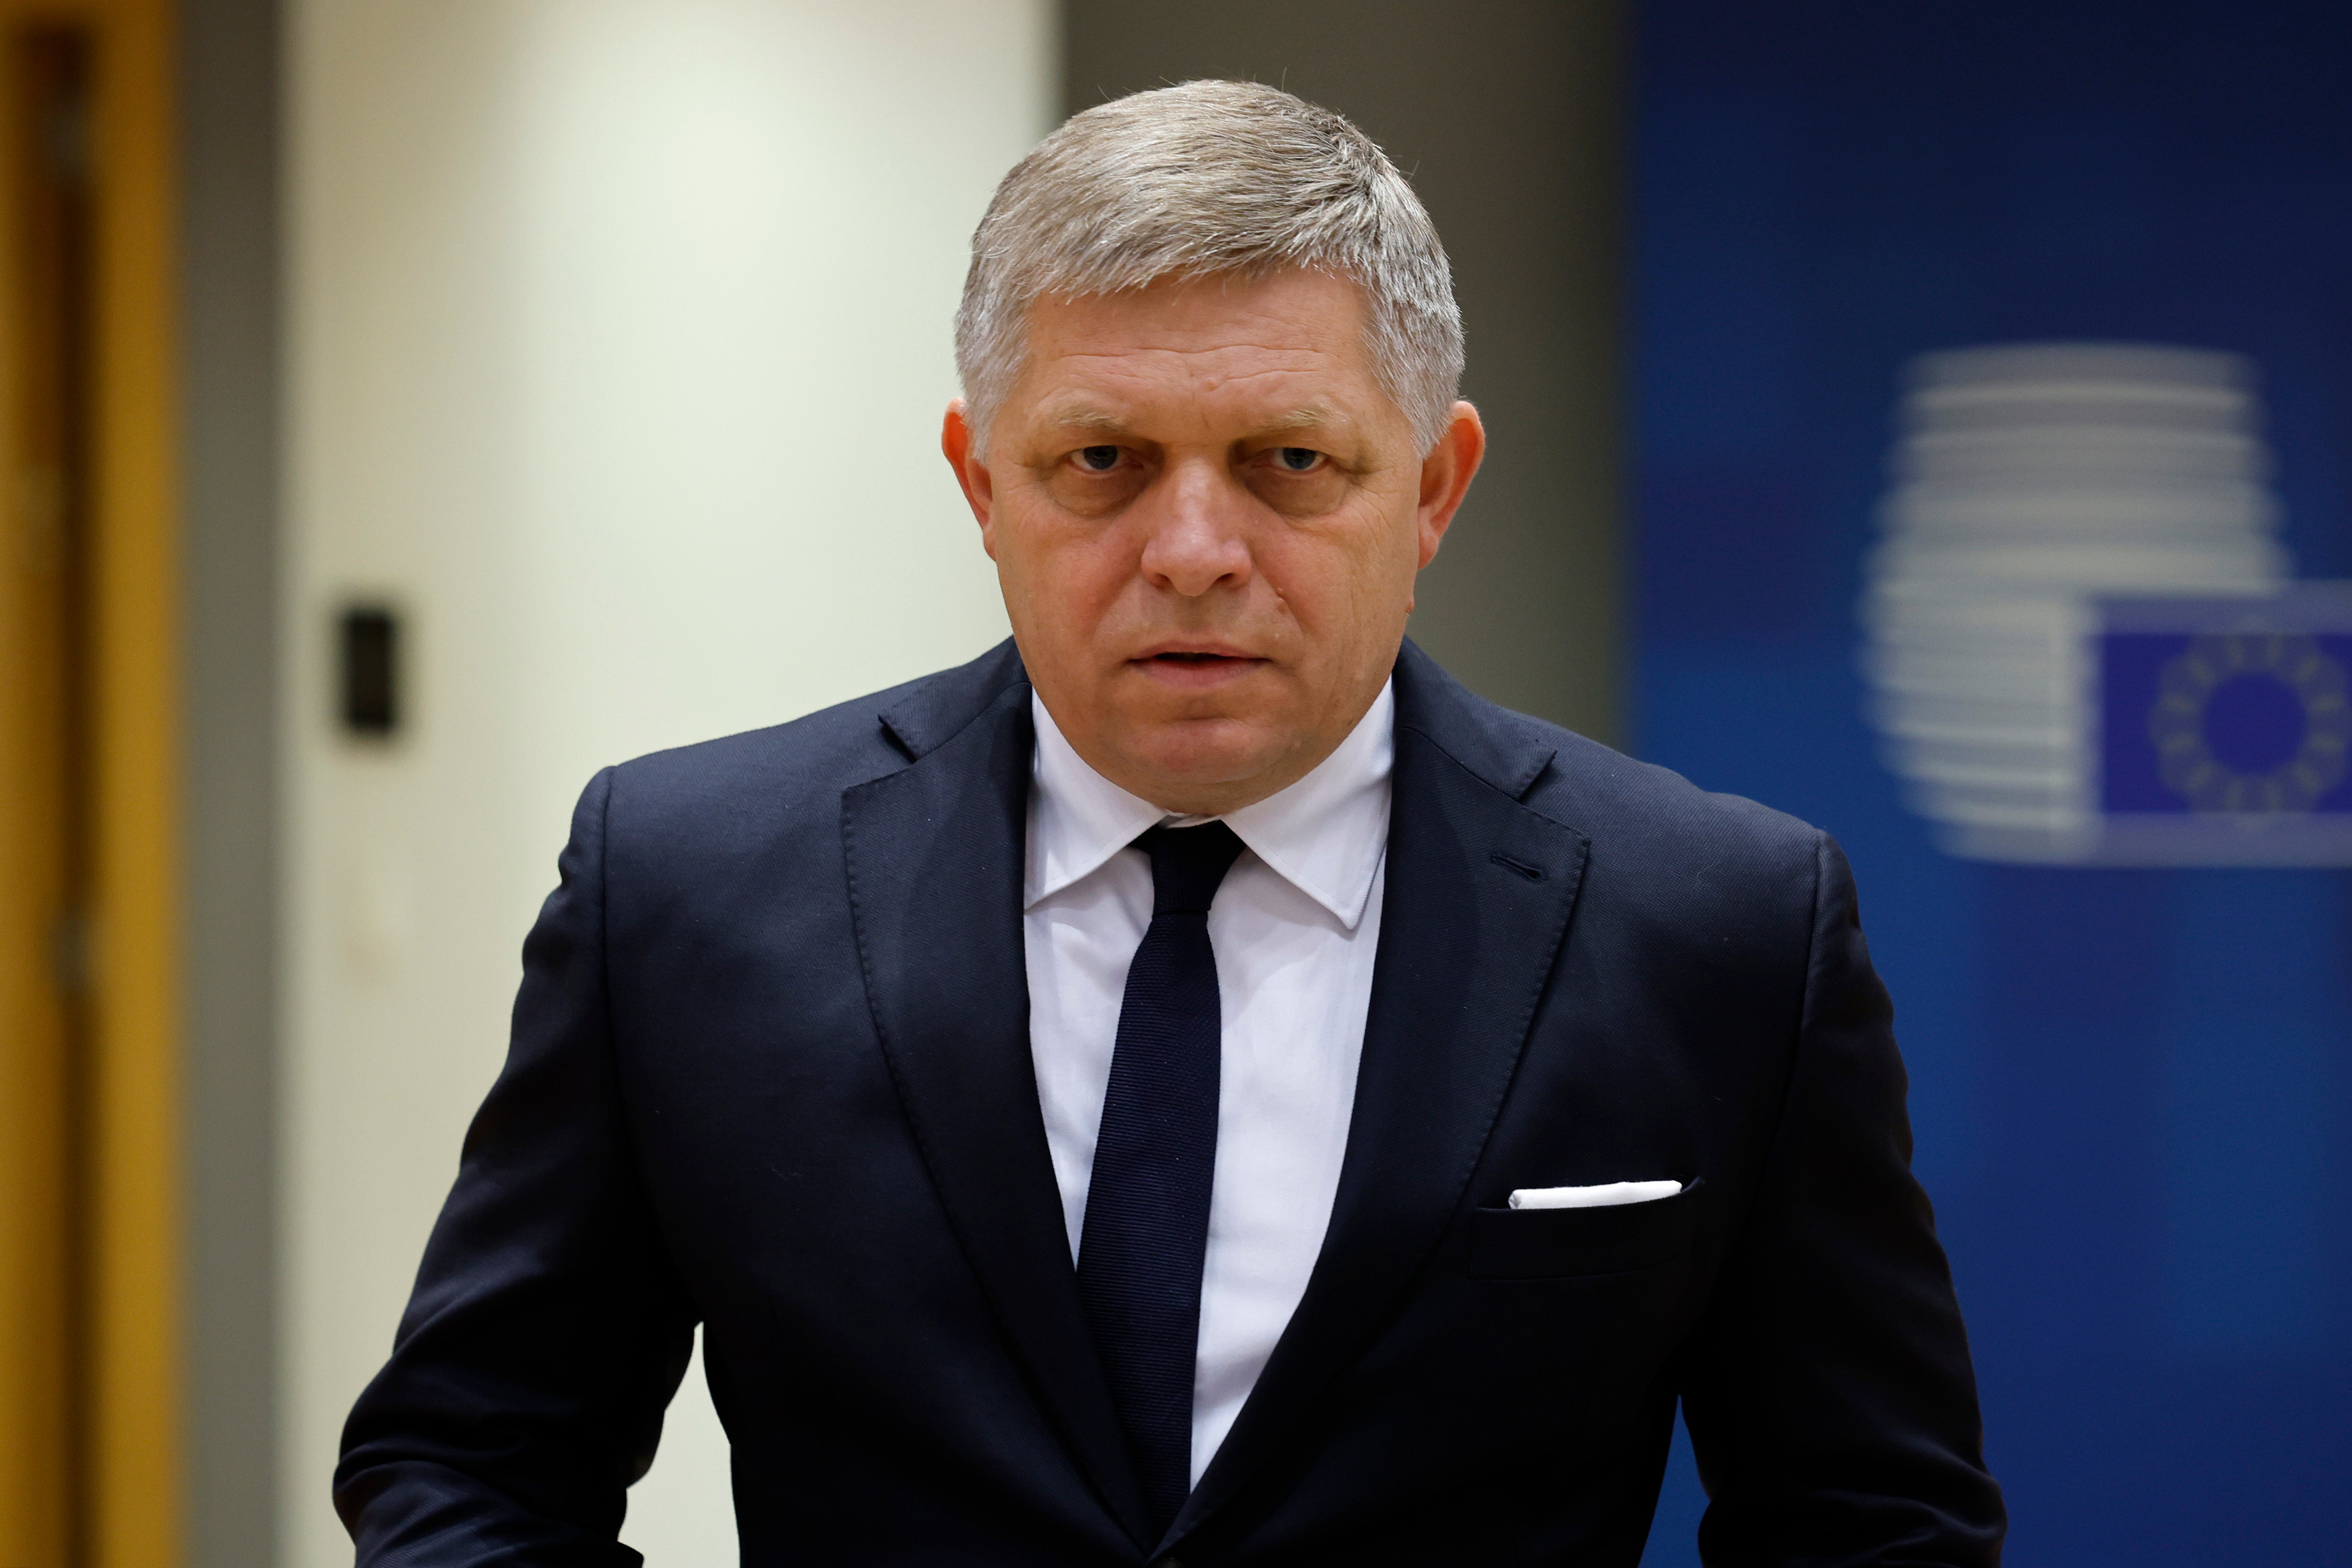 Slovakia prime minister Robert Fico is recovering from an attempt on his life